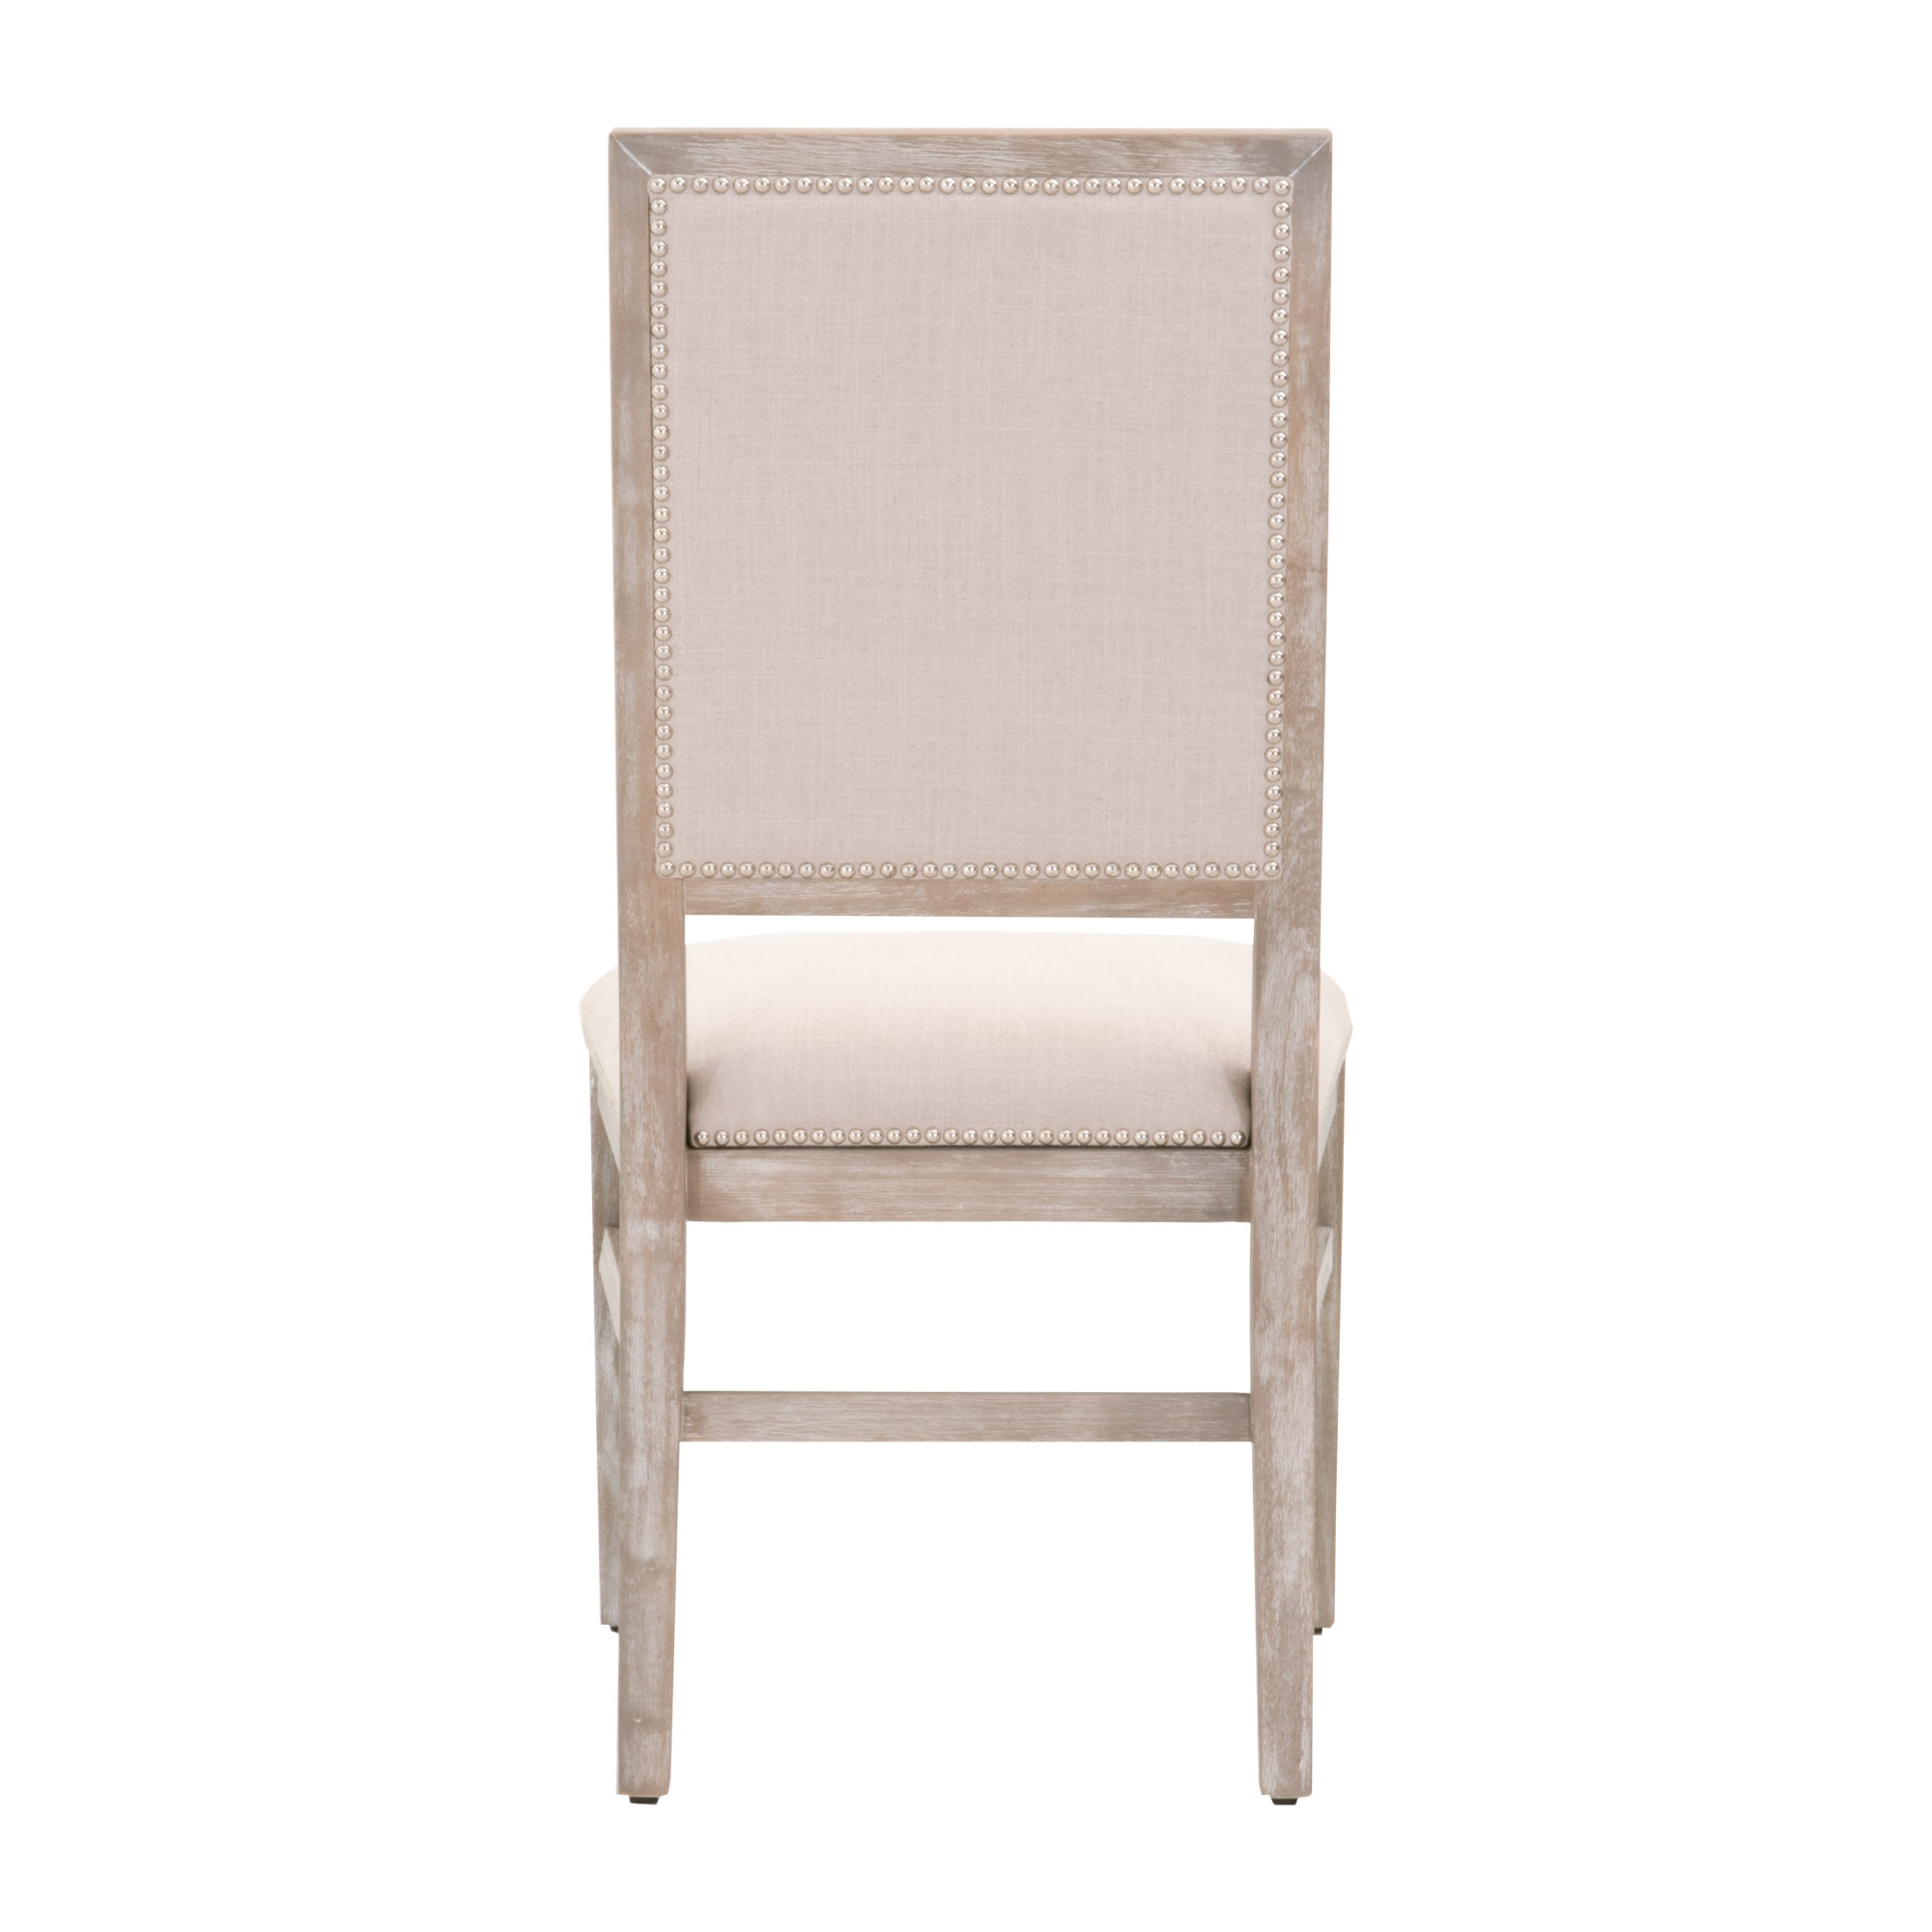 Dexter Dining Chair, Set of 2 - Image 4